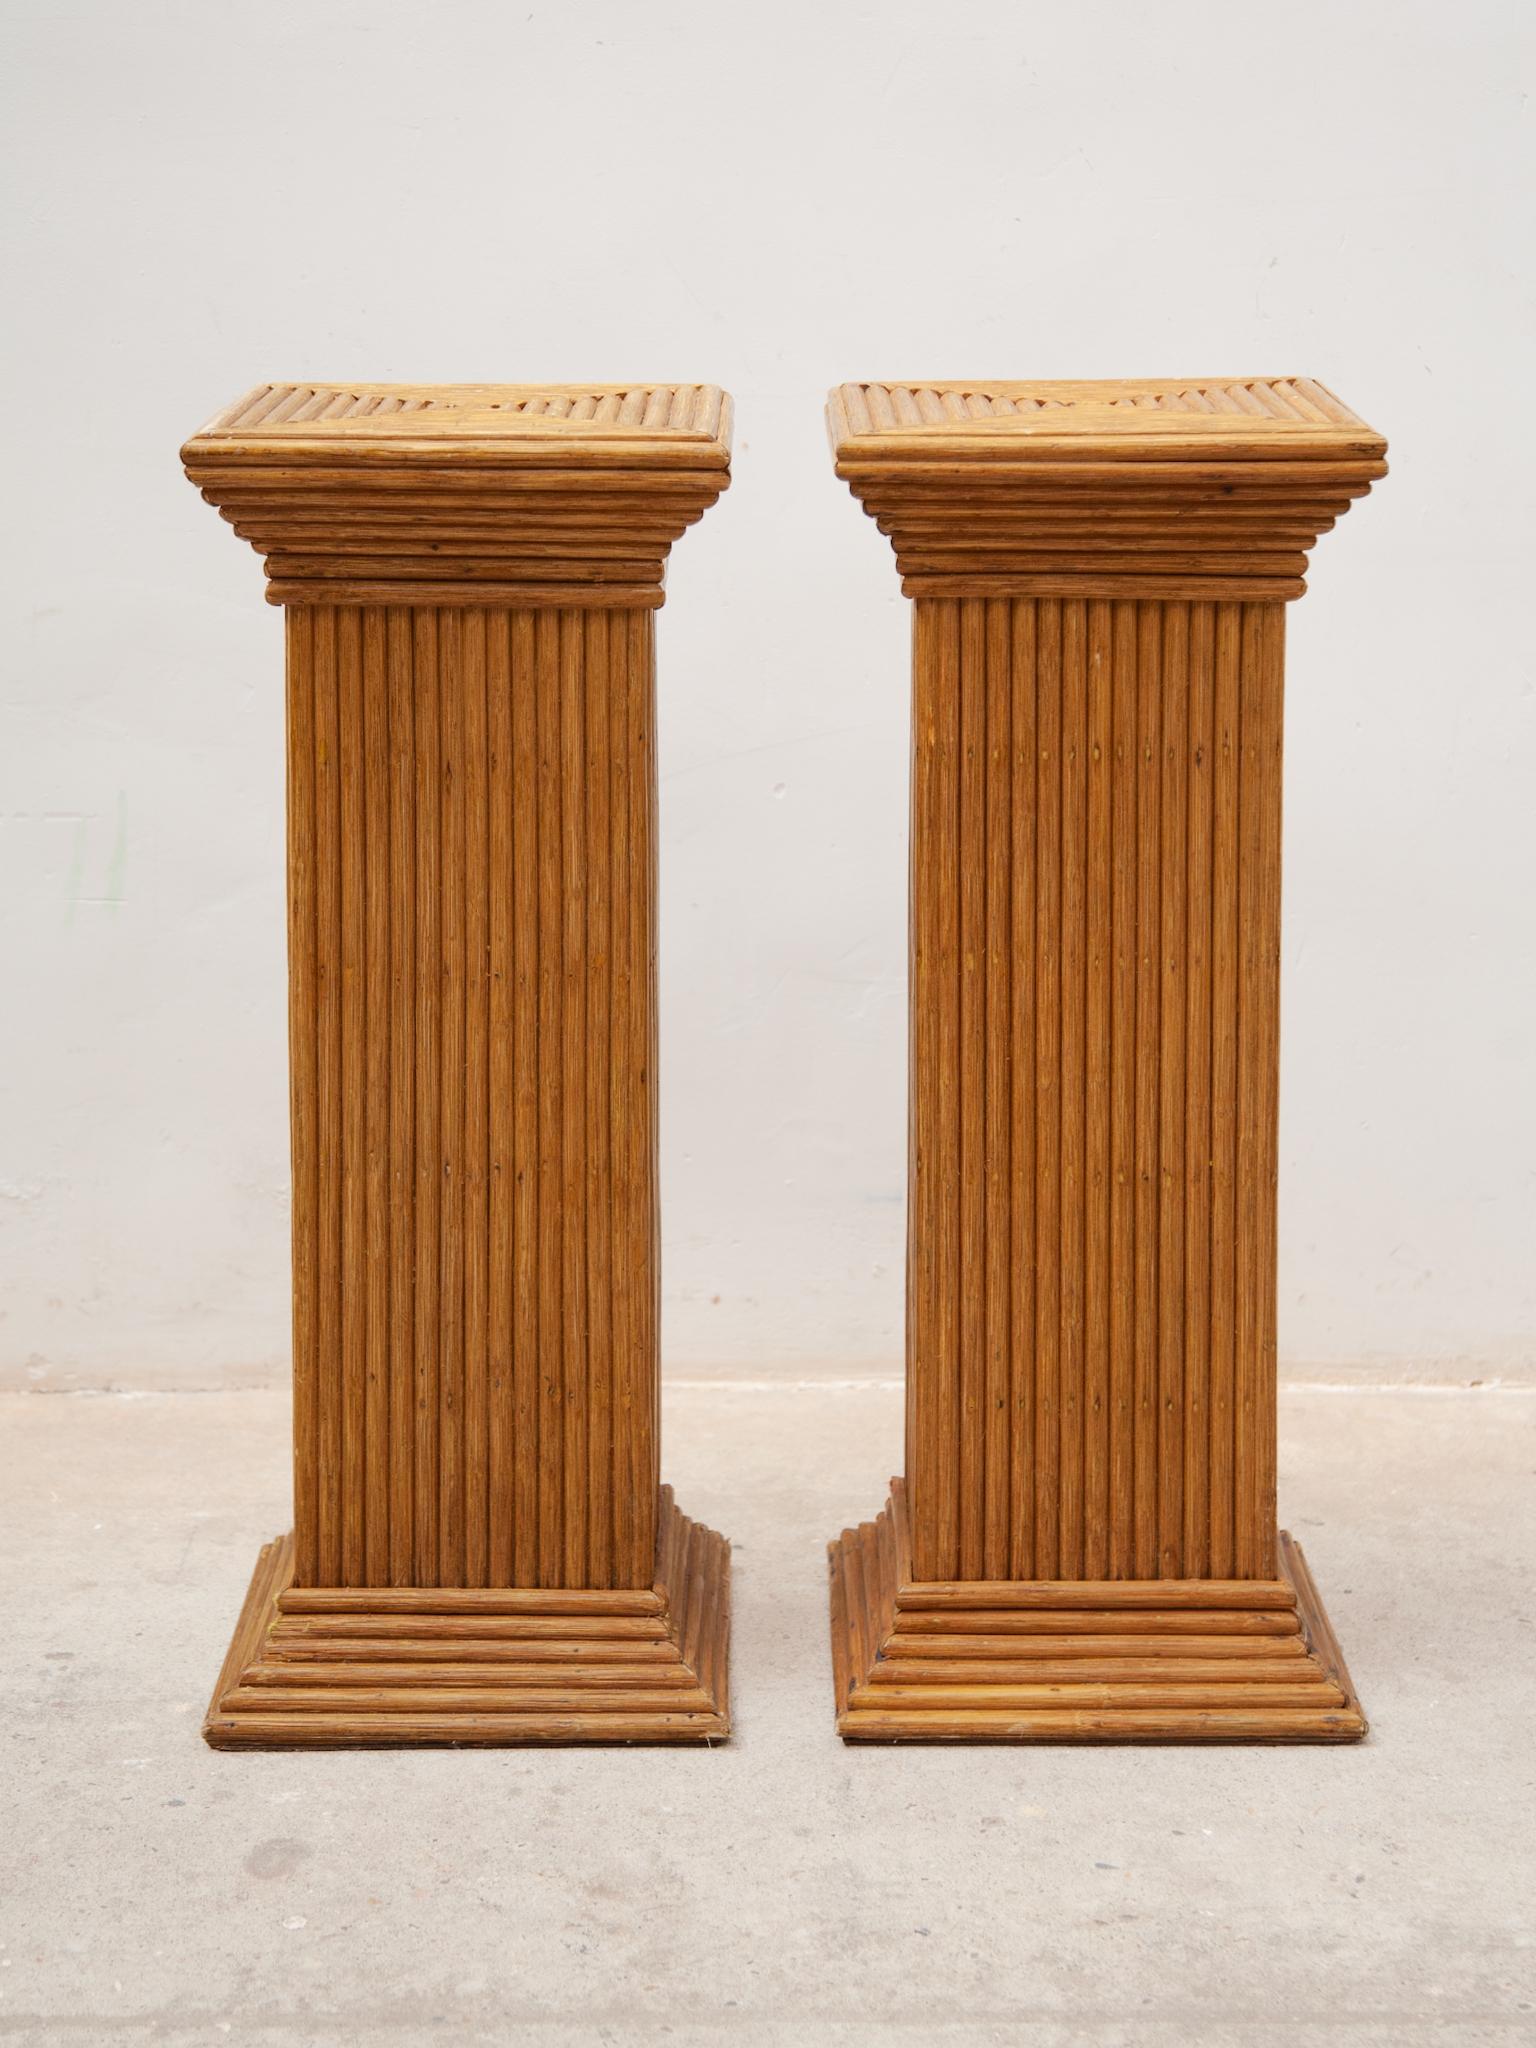 Vintage set of two of bamboo 1970s pedestal stands.

A beautiful set of two bamboo boho style plant stands, pedestals. In very good original condition. You can use this practical size pair for displaying sculptures, vases, bowls and much more, but